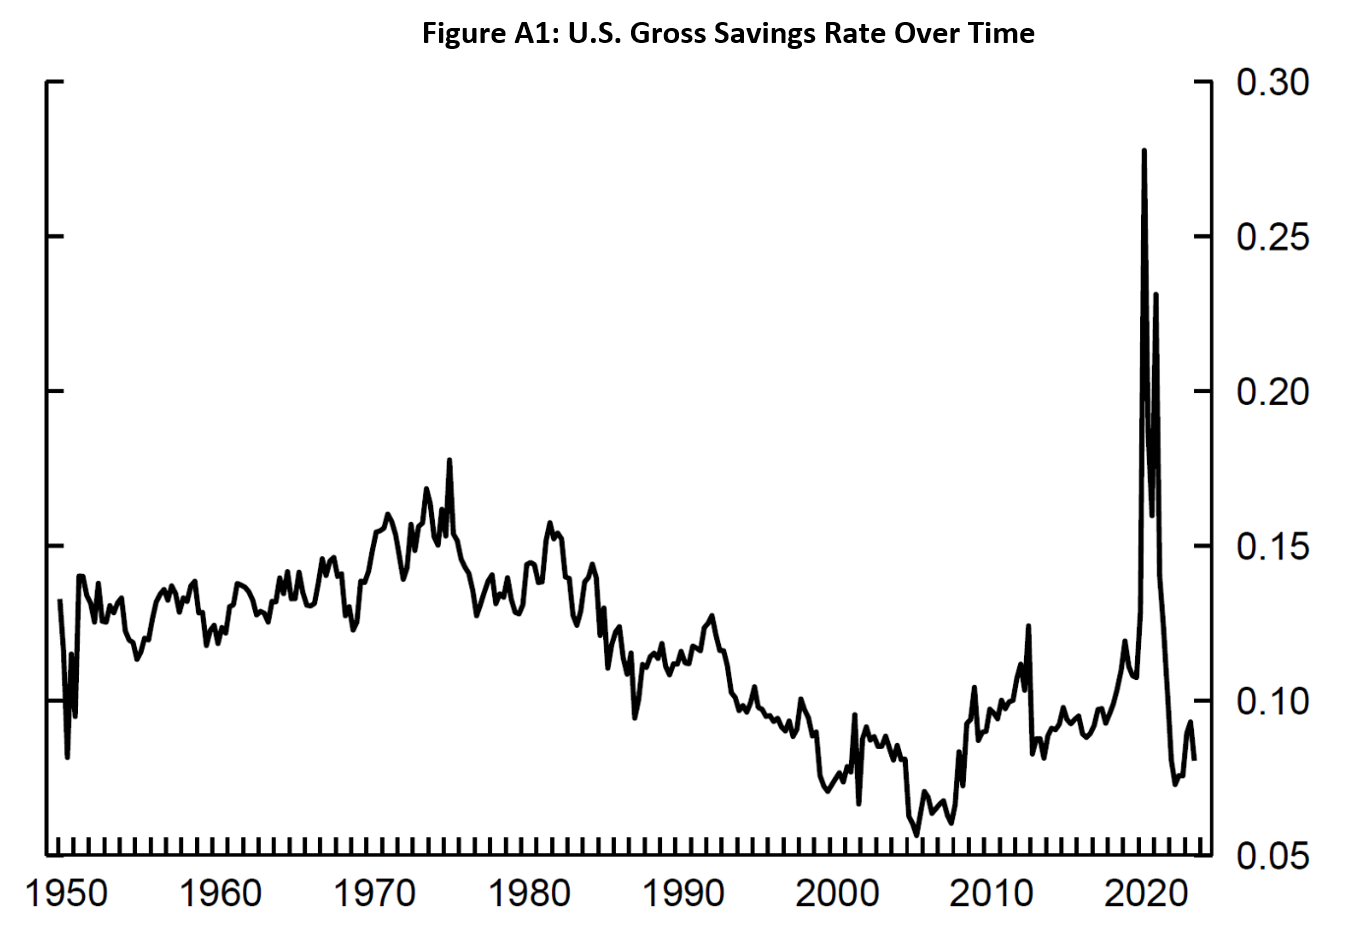 Figure A1. U.S. Gross Savings Rate Over Time. See accessible link for data.